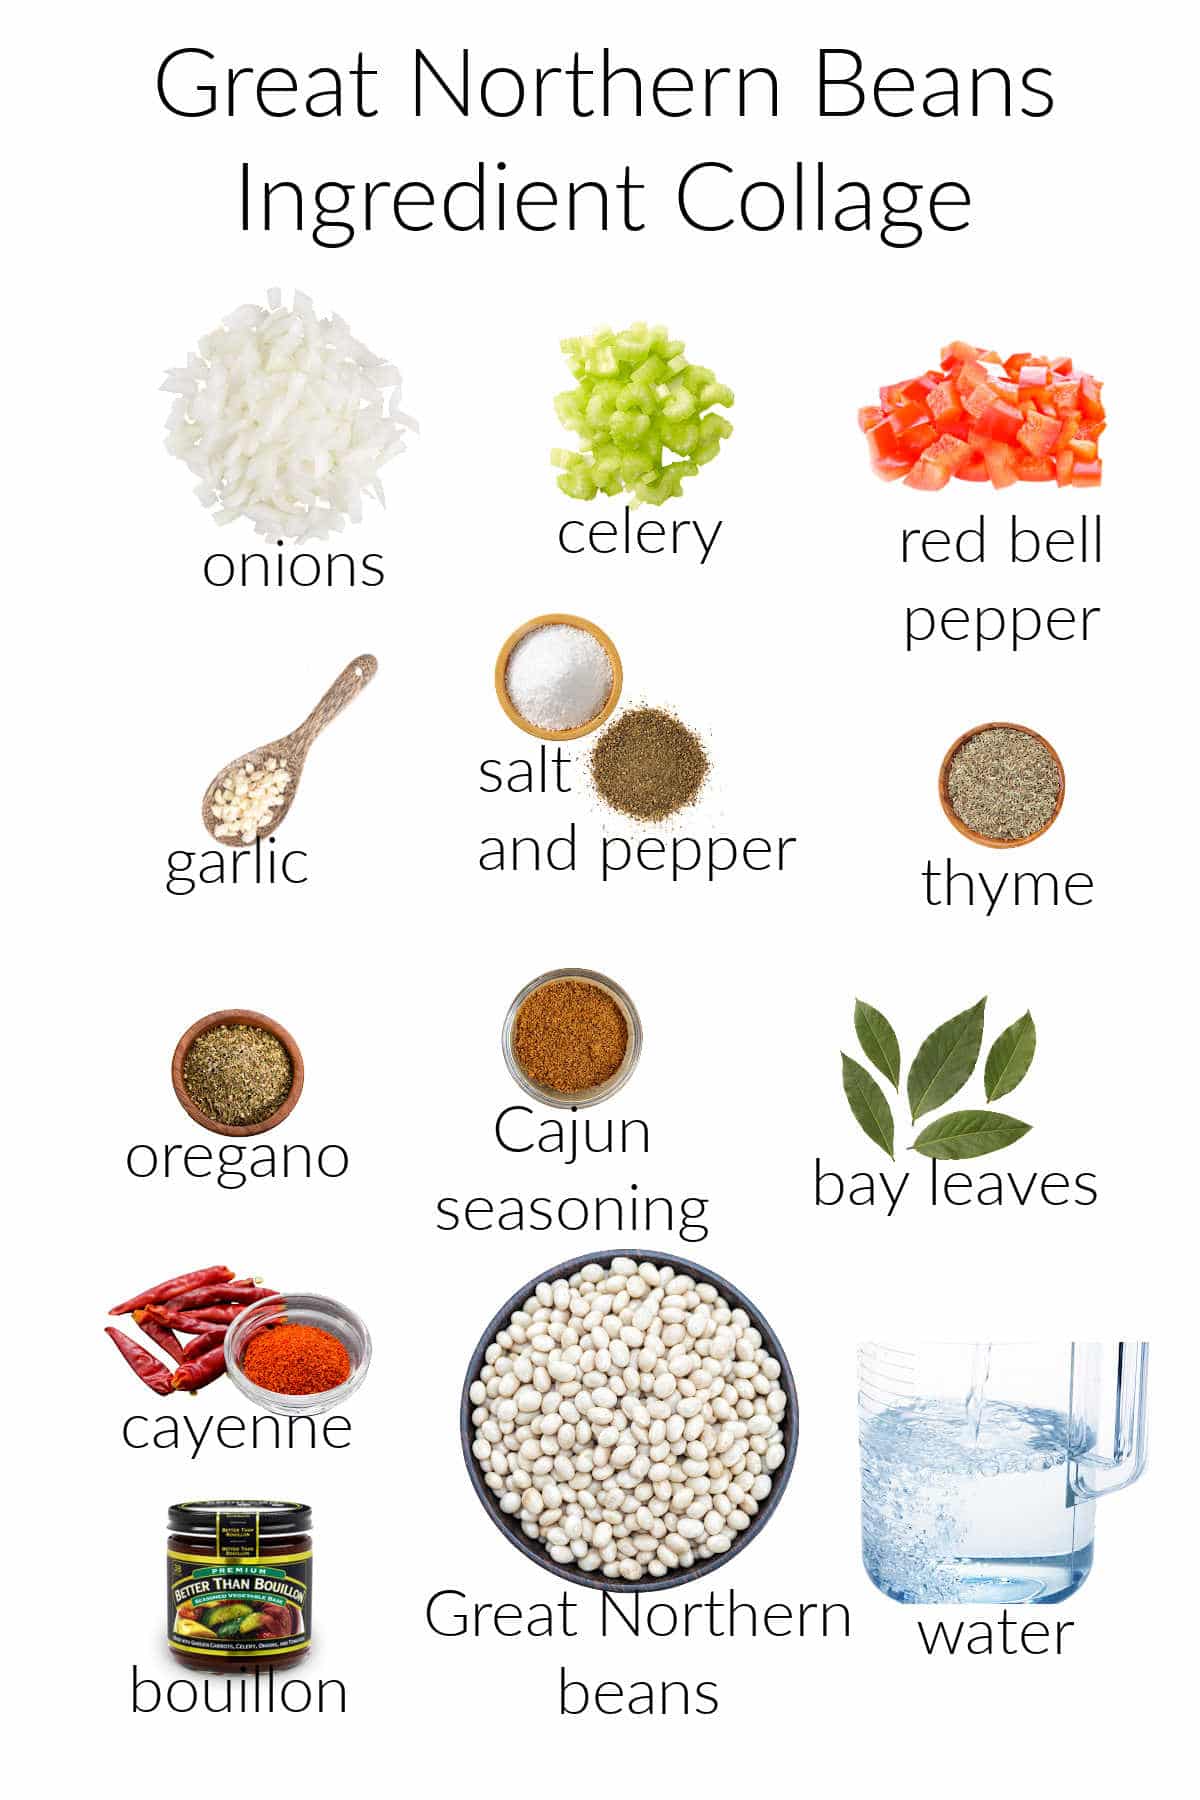 A collage of ingredients for making Great Northern beans.